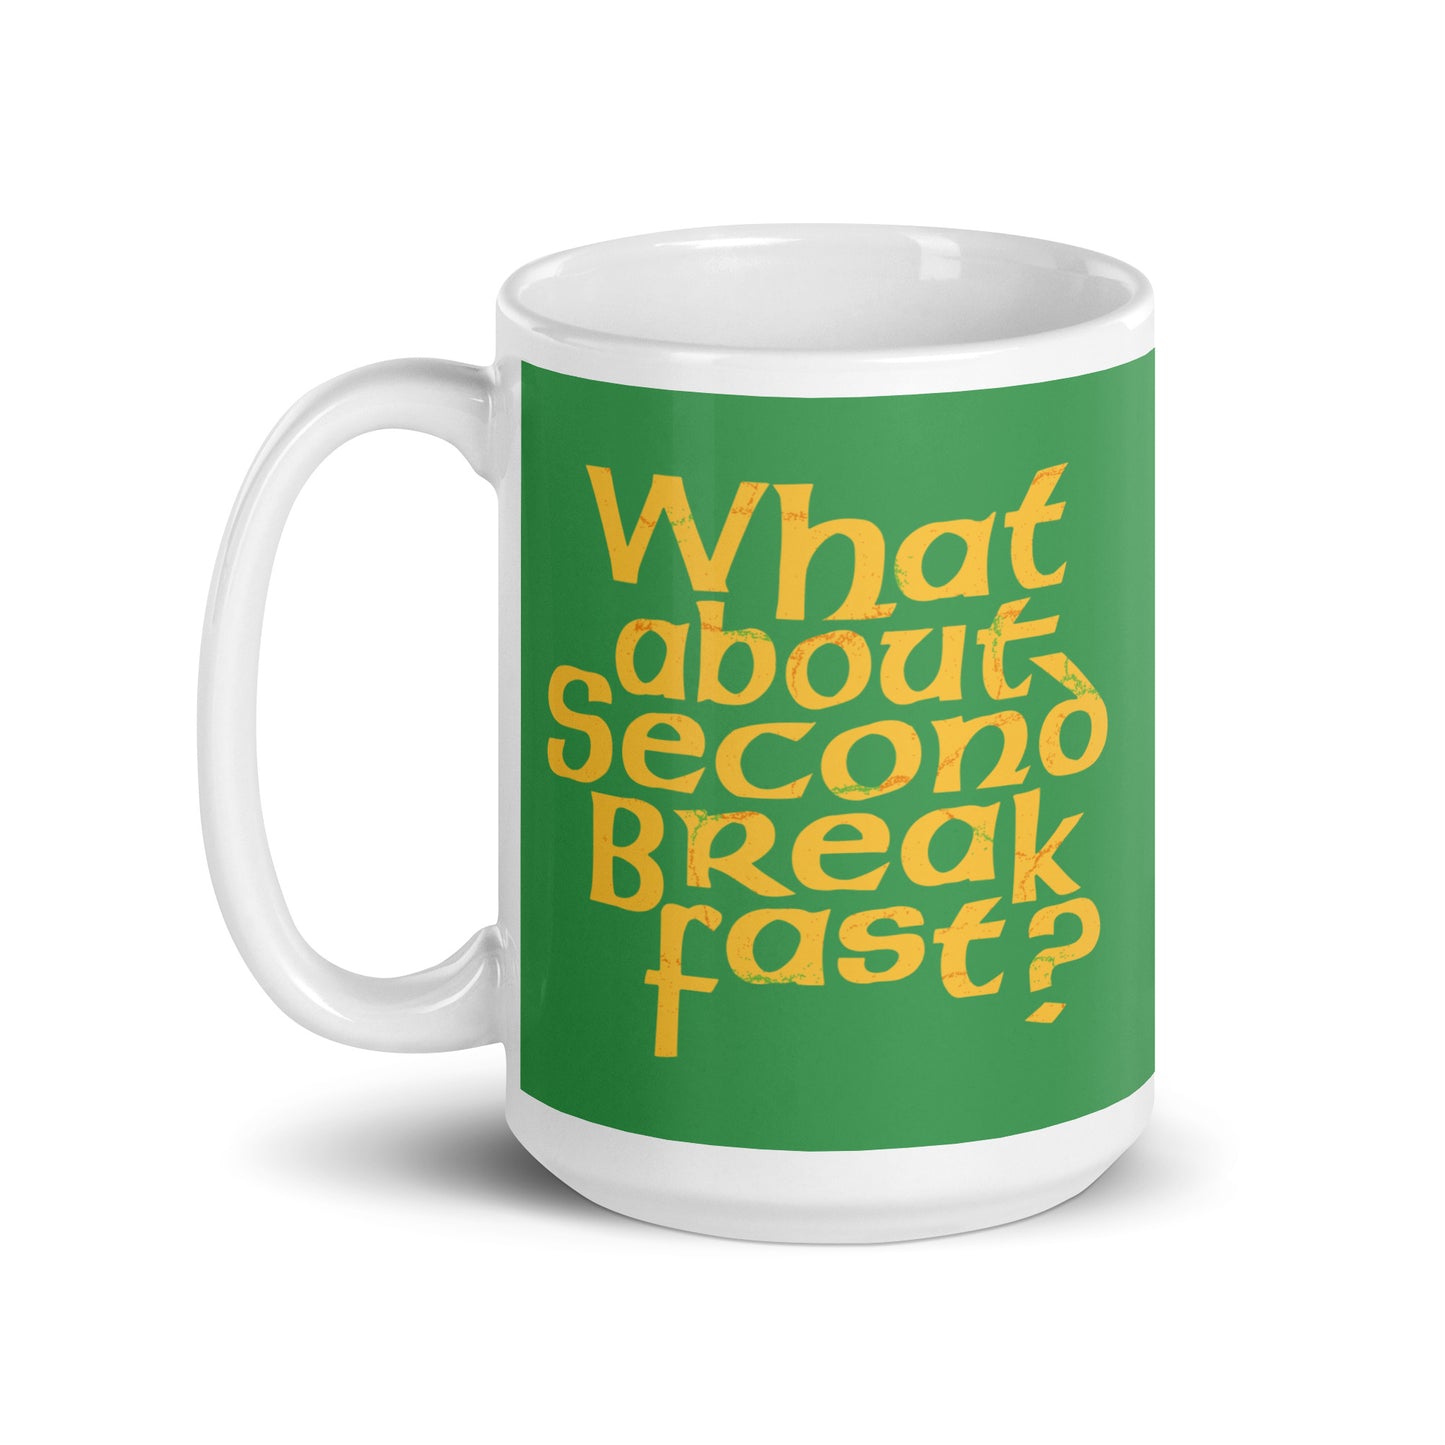 What About Second Breakfast? Mug